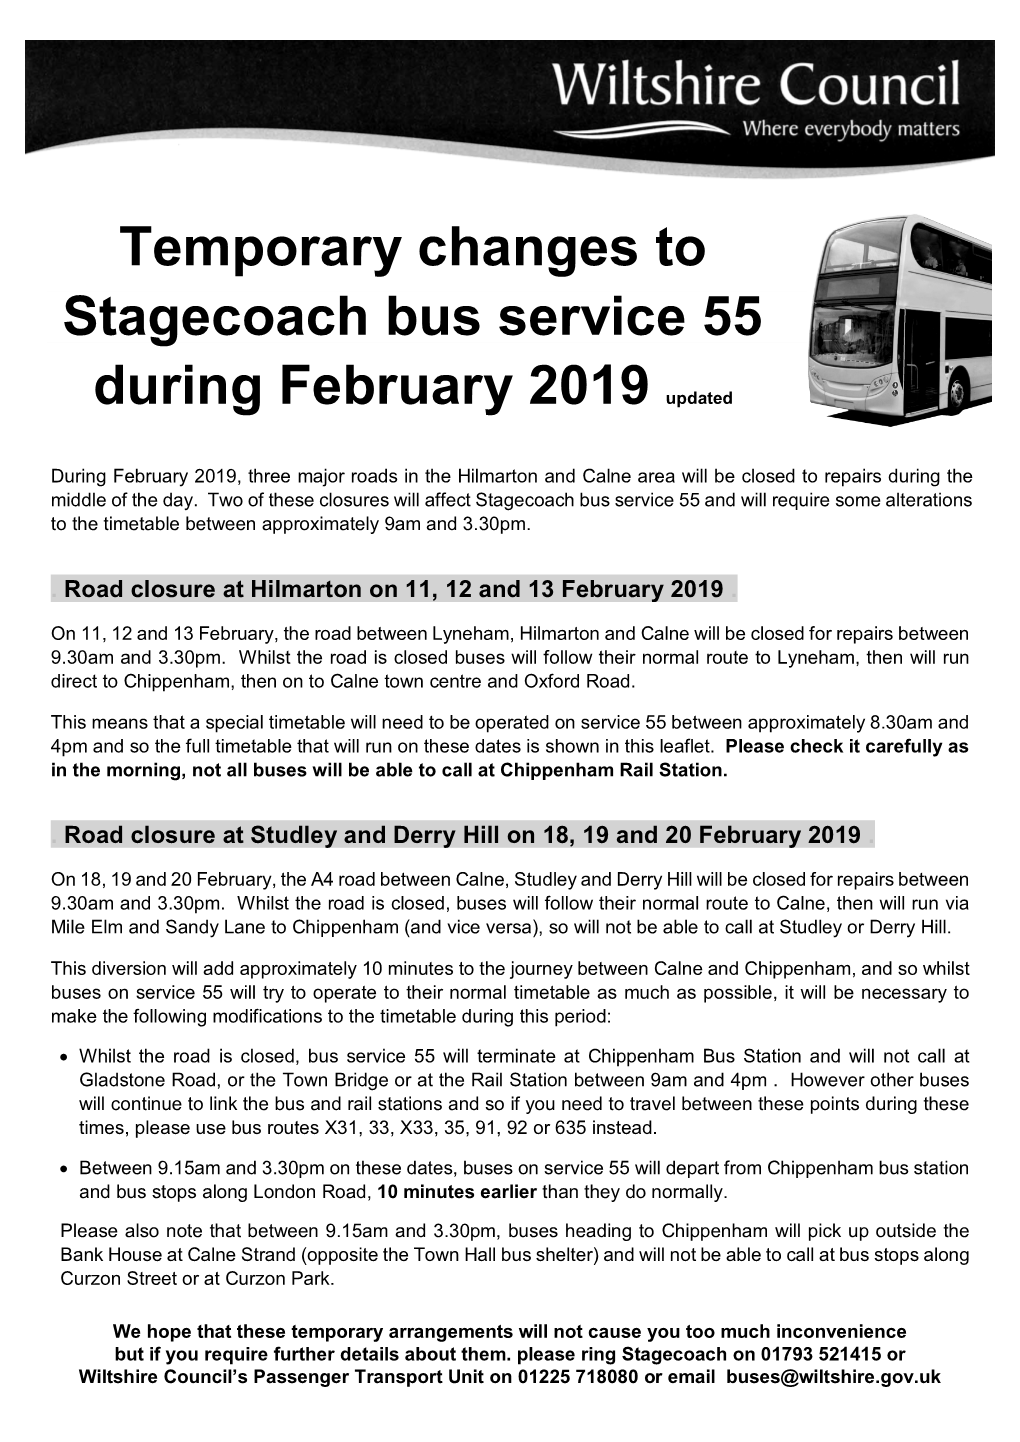 Temporary Changes to Stagecoach Bus Service 55 During February